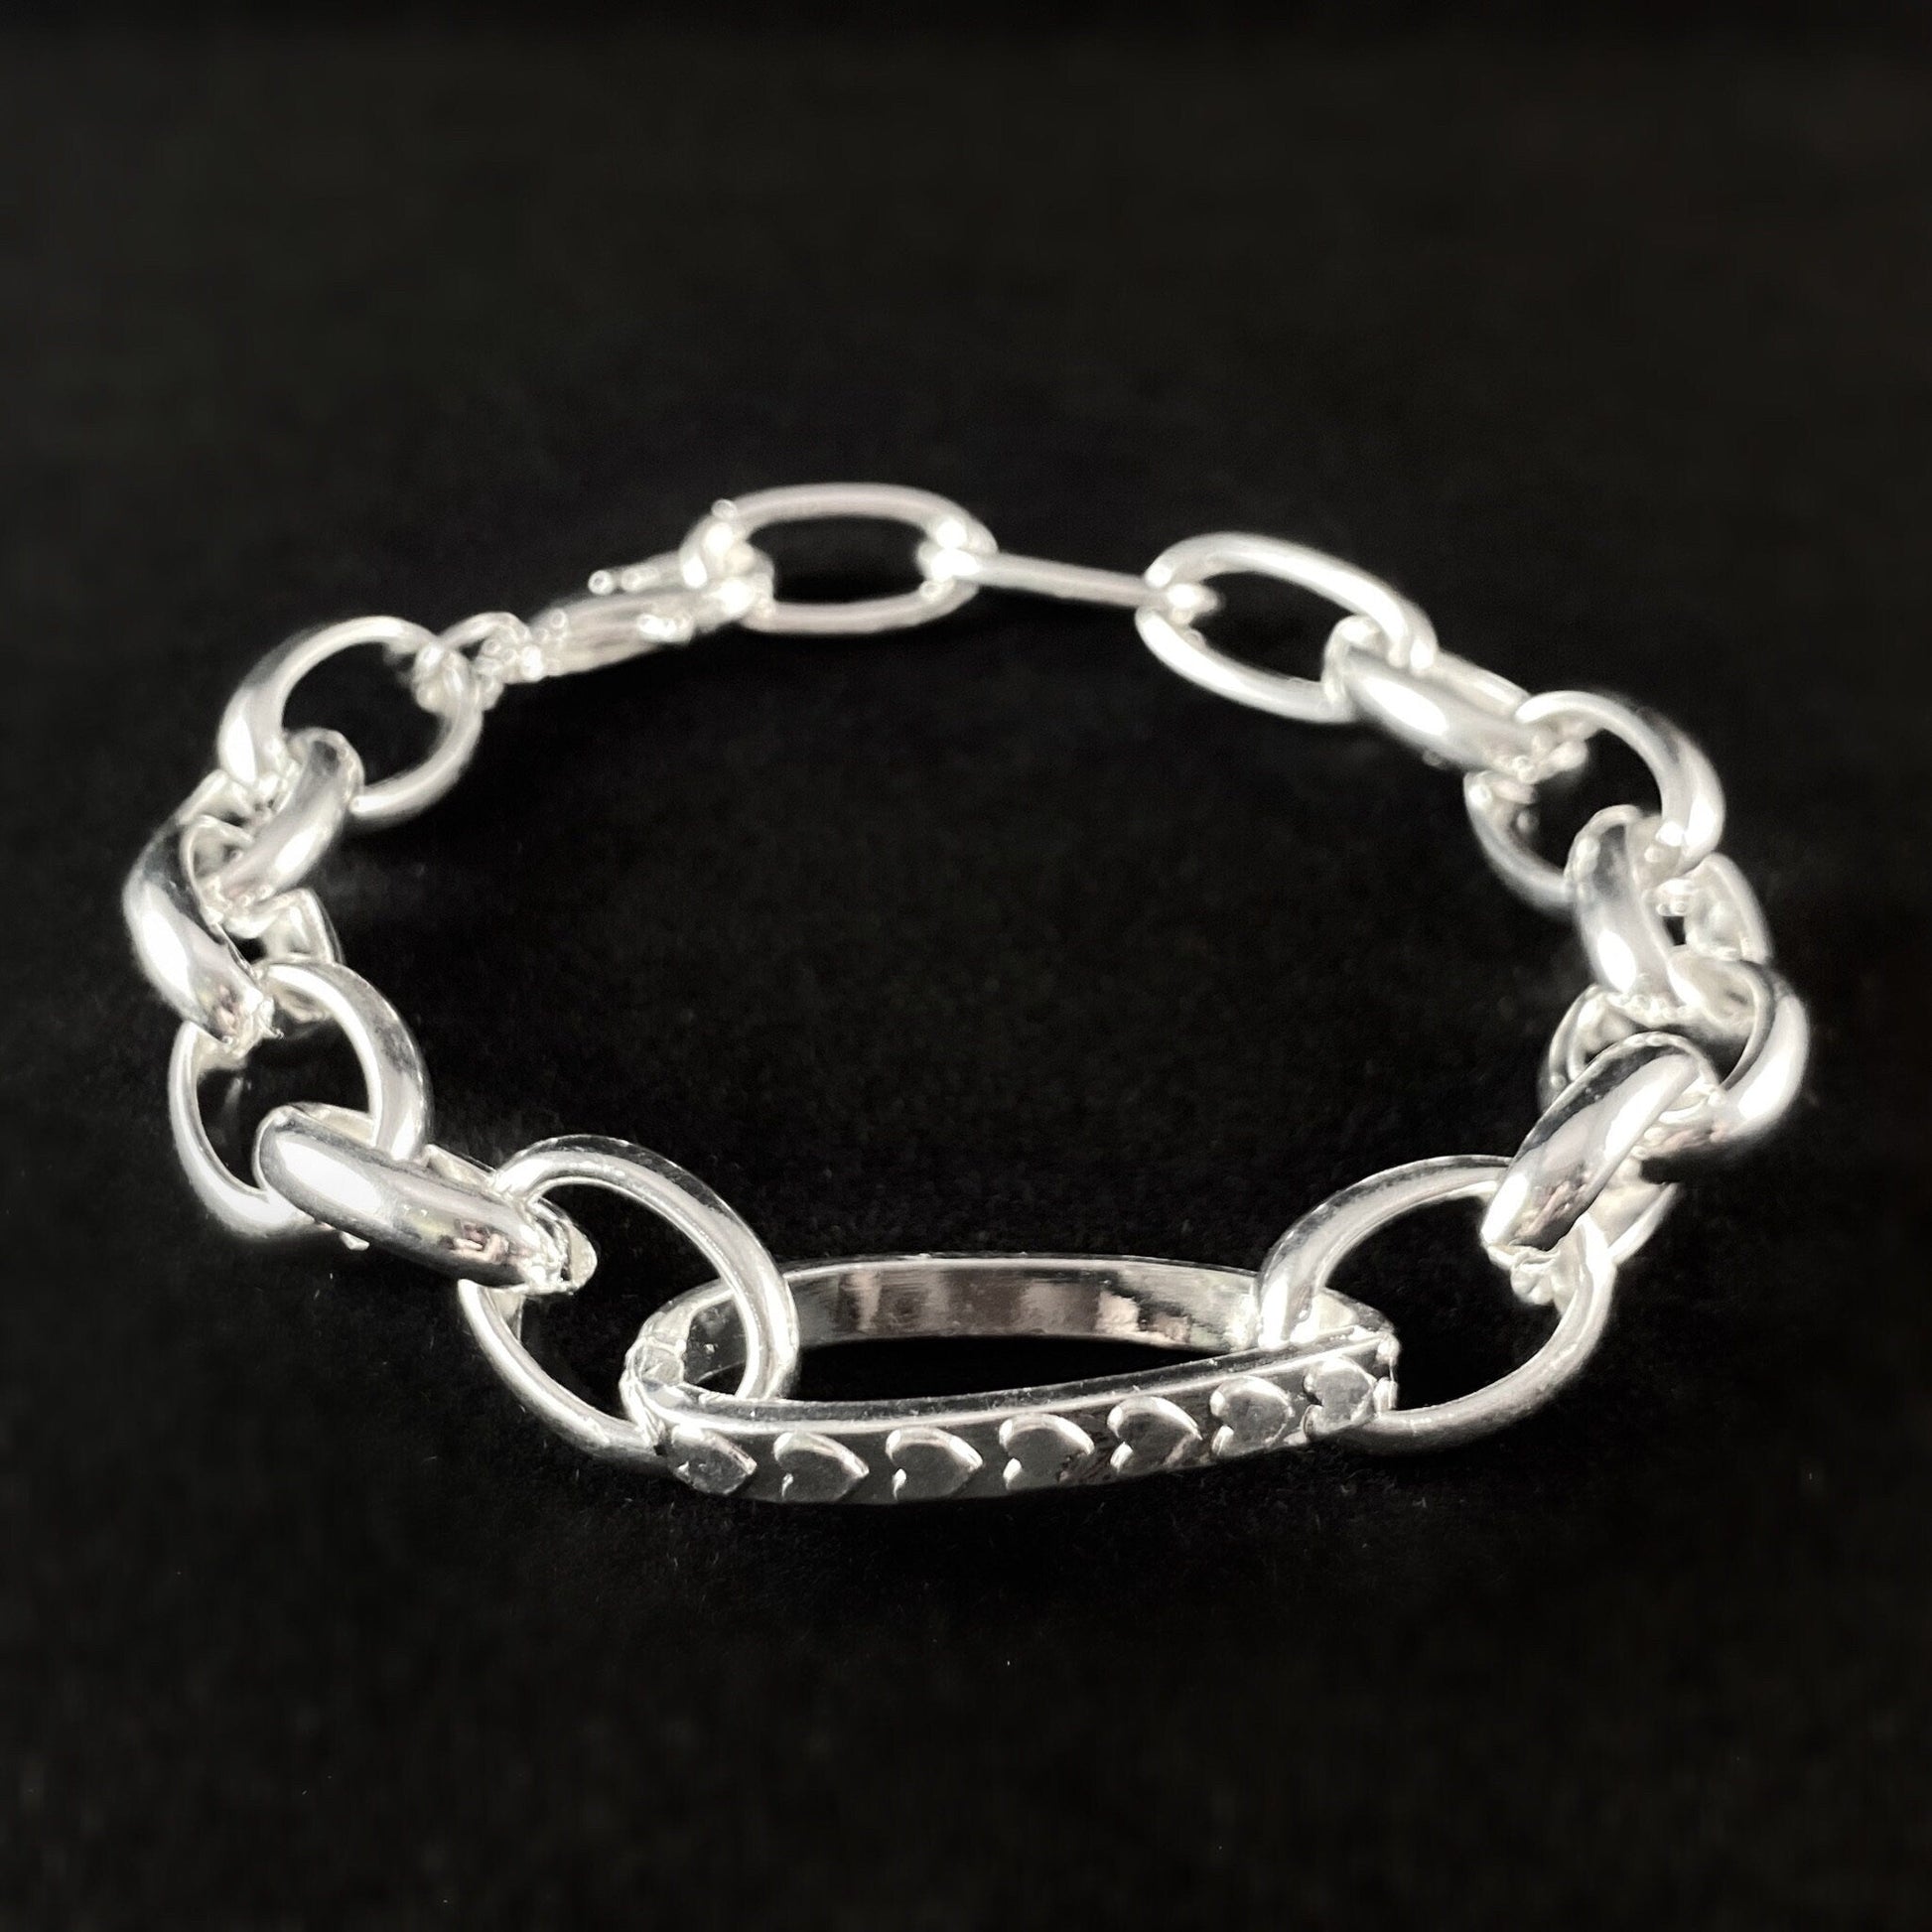 Chunky Silver Chain Bracelet with Tiny Heart Detailing - Handmade Nickel Free Ulla Jewelry